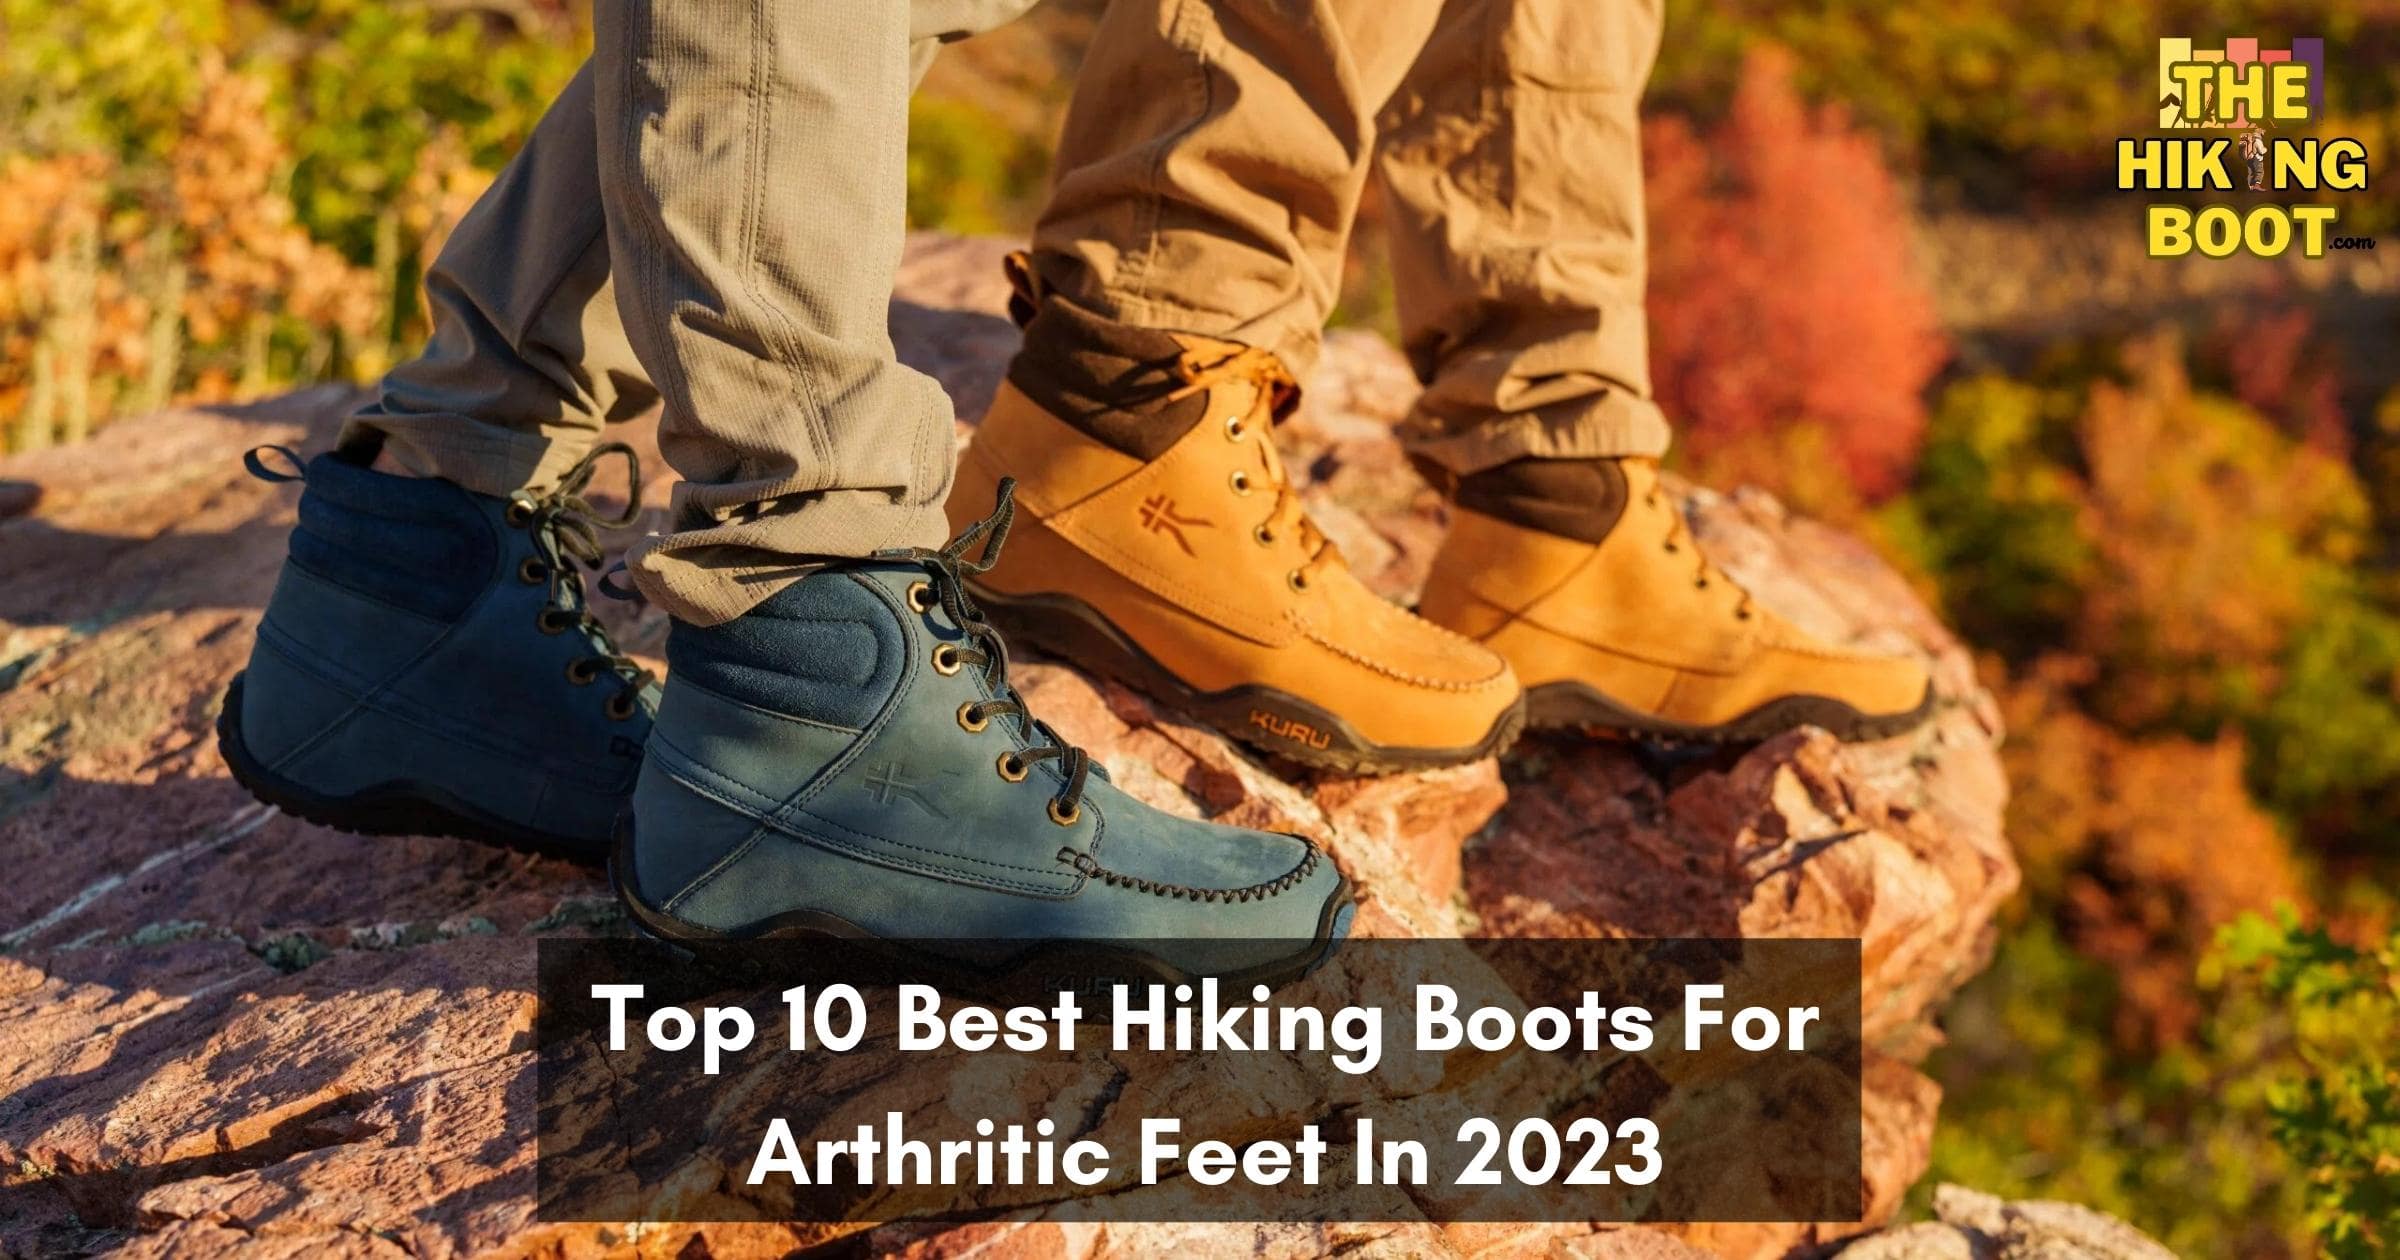 Top 10 Best Hiking Boots For Arthritic Feet In 2023